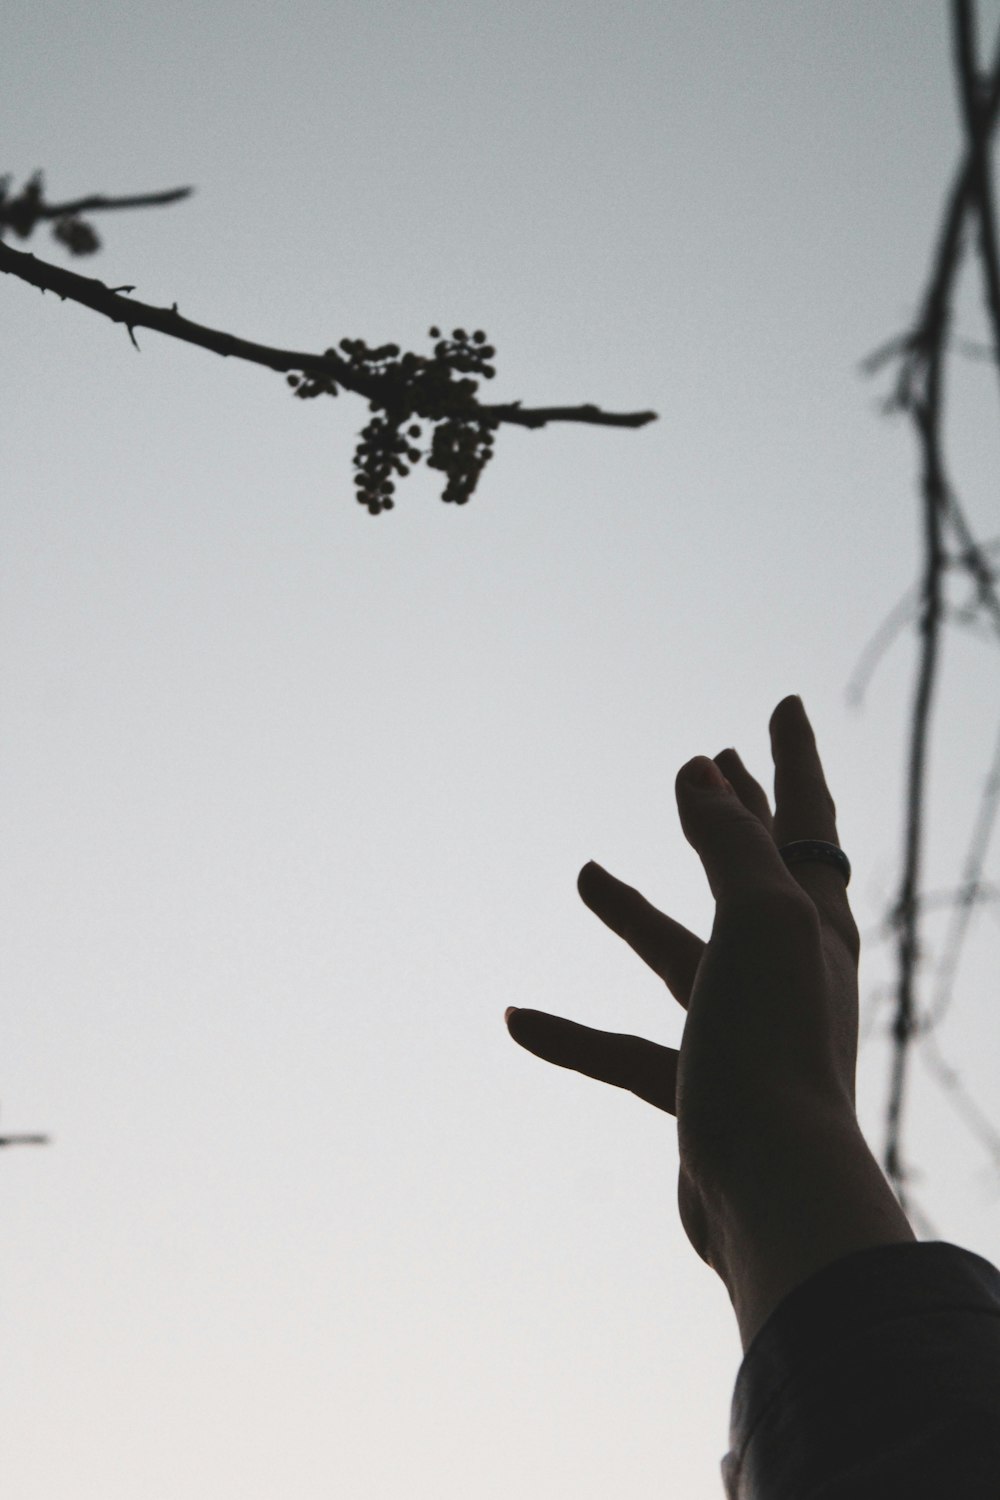 a person's hand reaching up into the sky